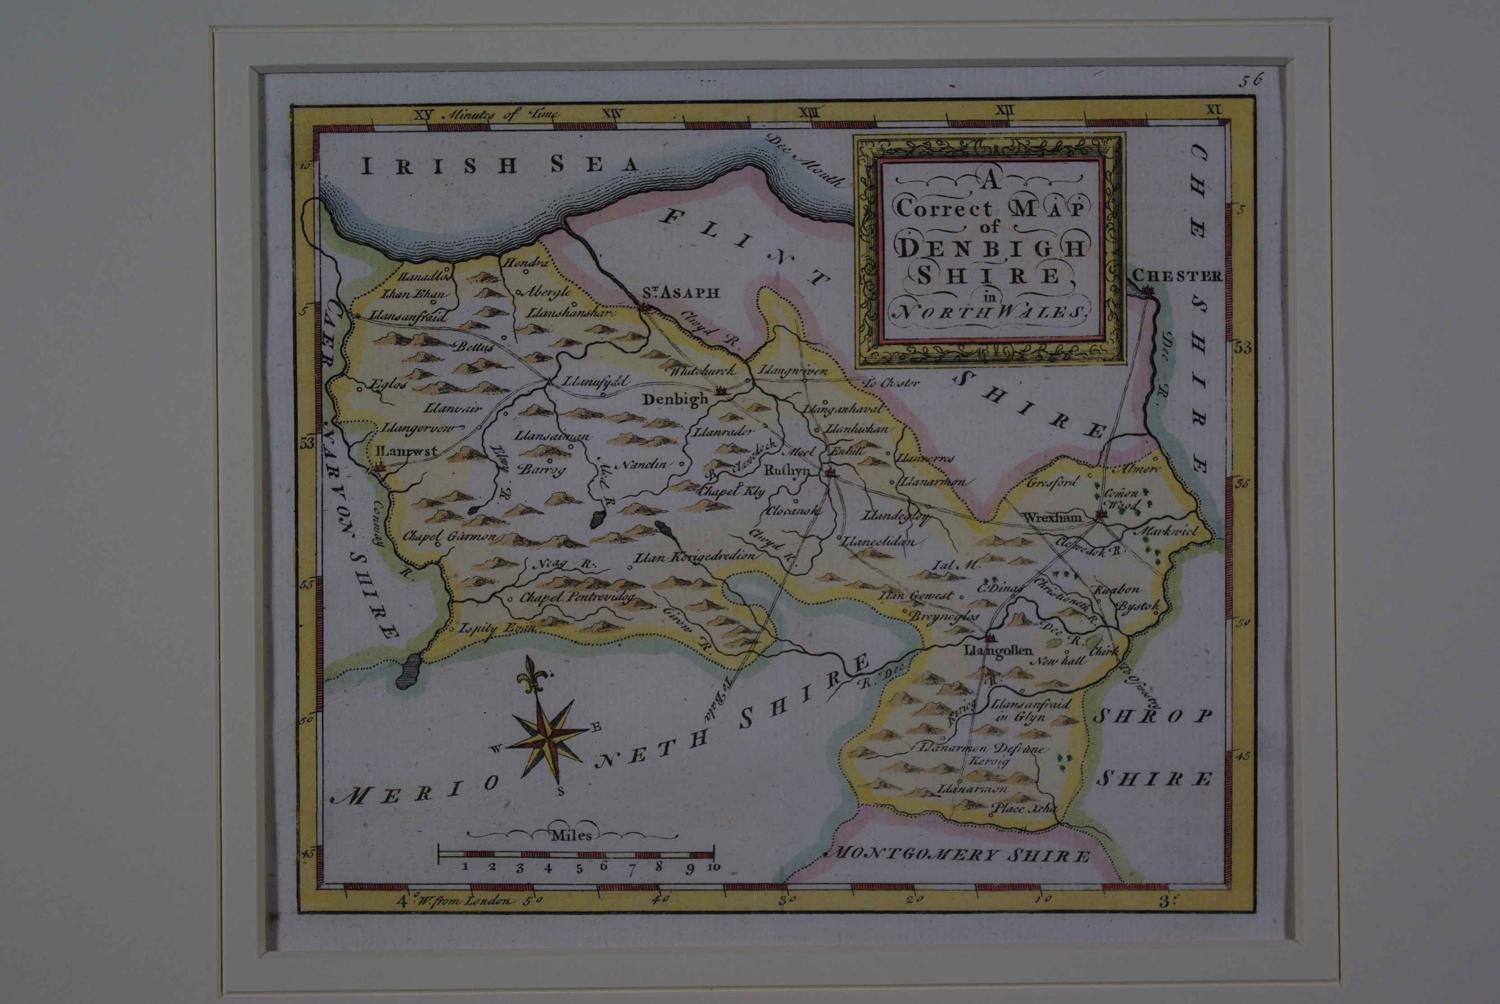 A Correct Map of  Denbighshire in North Wales by Thomas Osborne